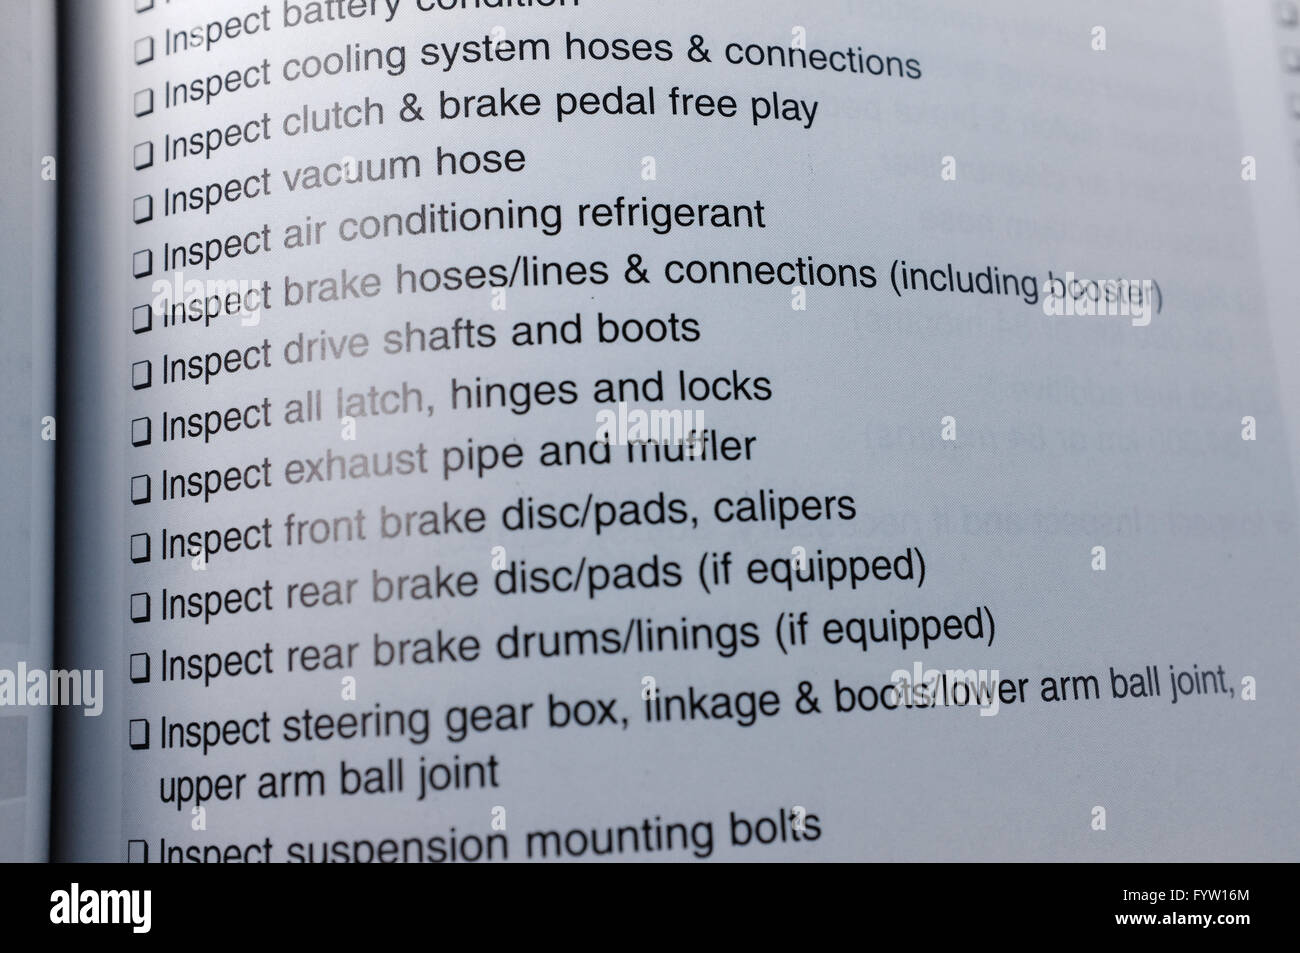 An inspection guide in a Hyundai Accent Owner's Manual. Stock Photo